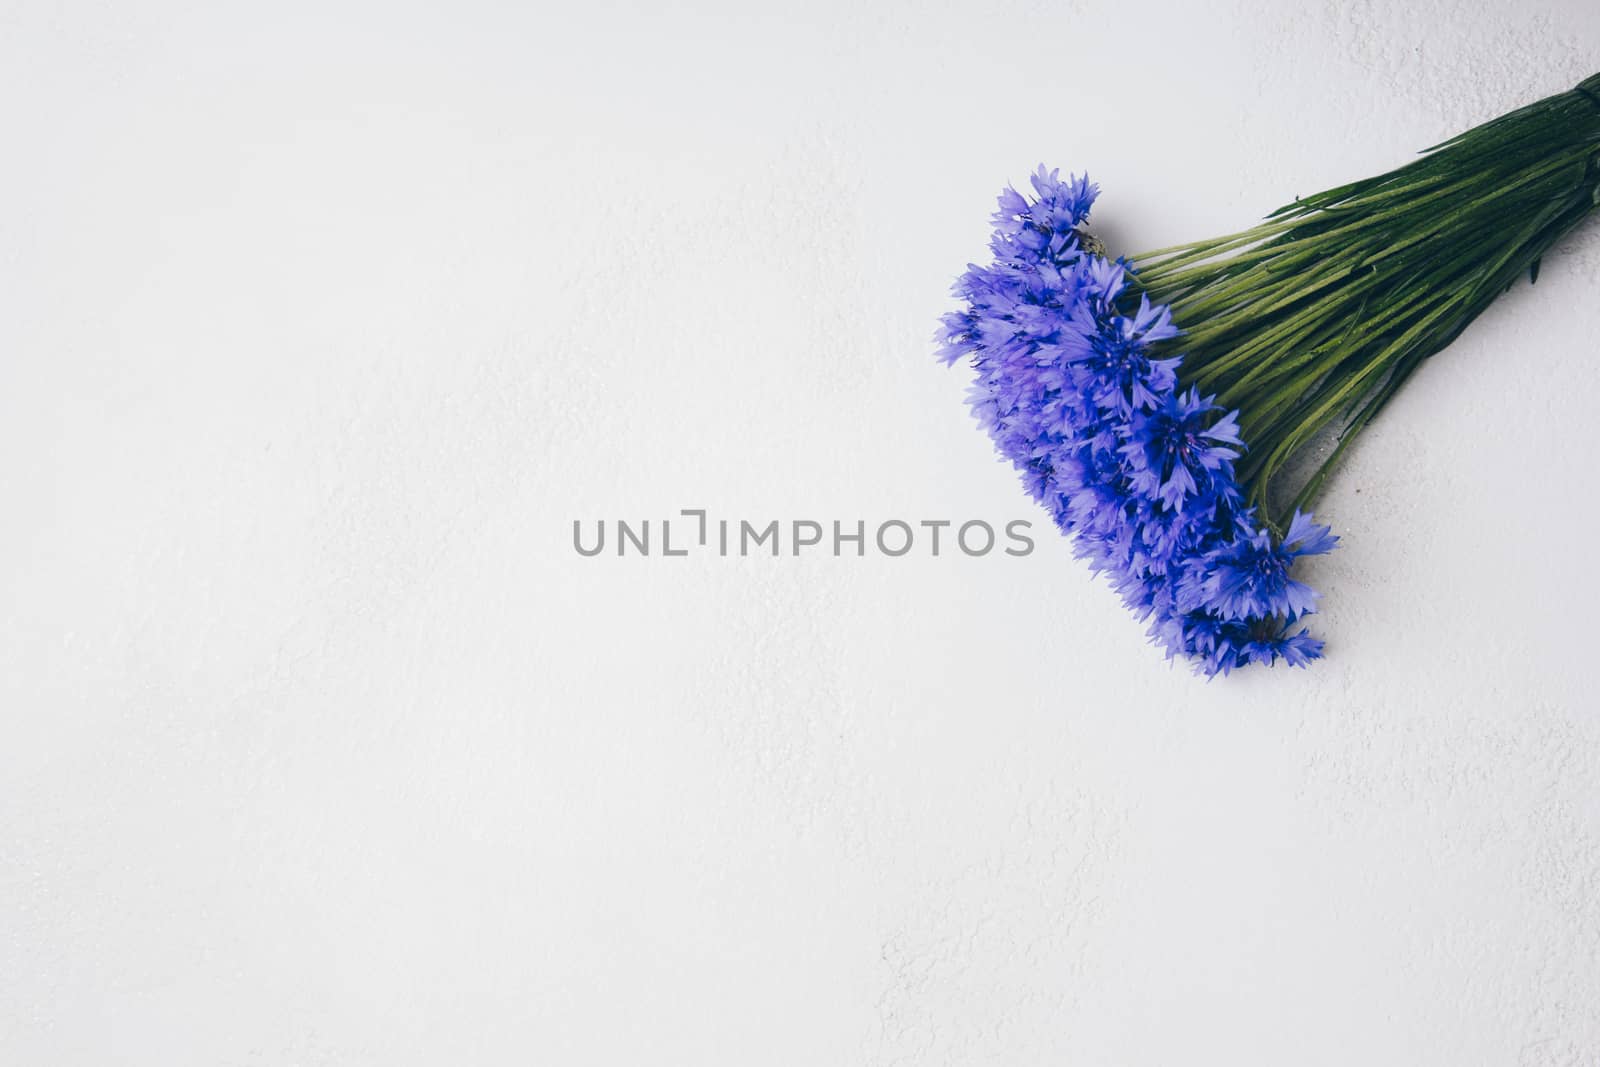 blue cornflowers bouquet, summer flowers on white background, floral background, beautiful small cornflowers close up by yulaphotographer